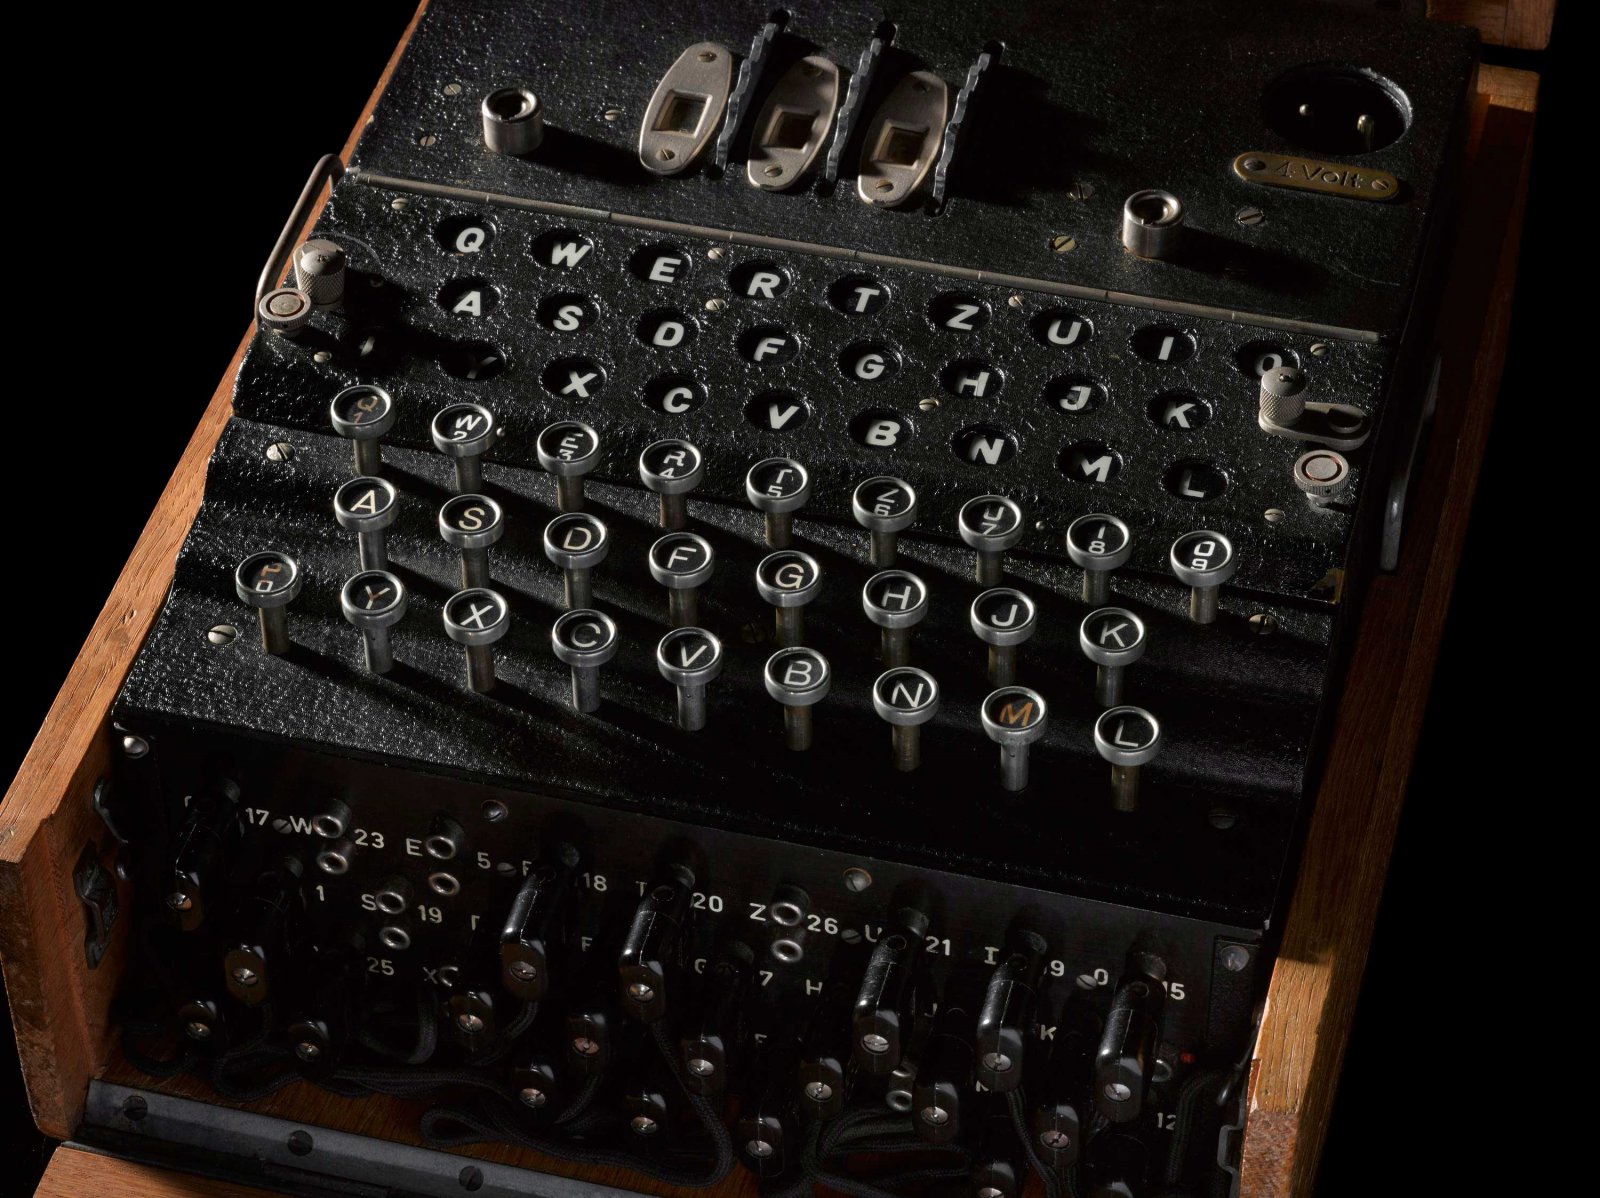 Breaking Enigma: A story of European co-operation